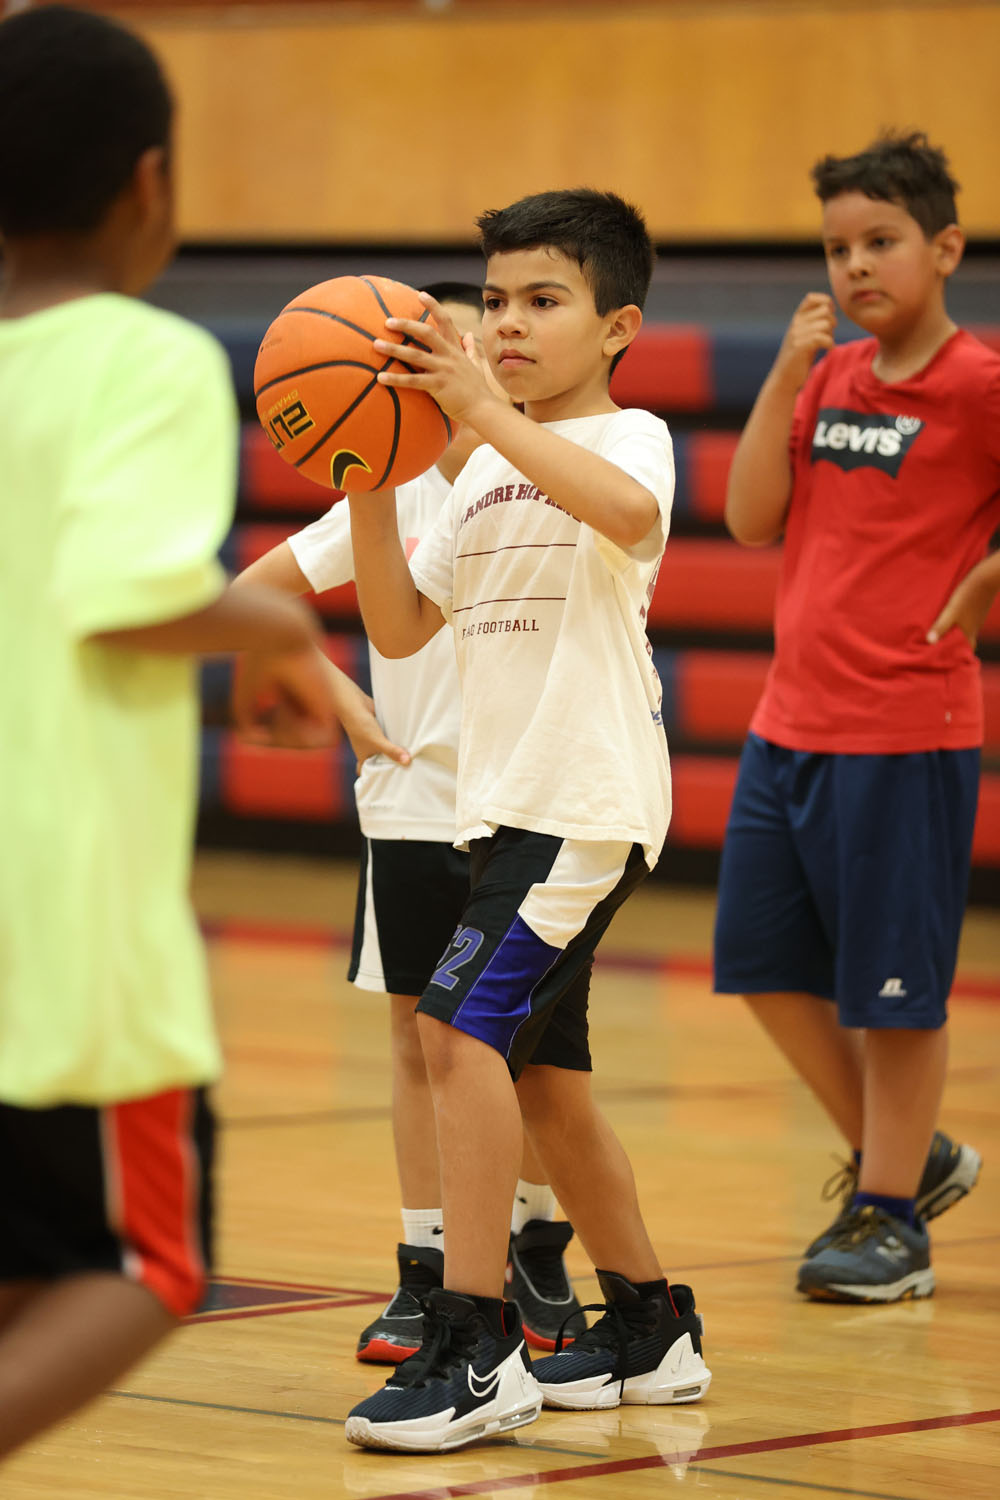 Camper looking to pass the ball